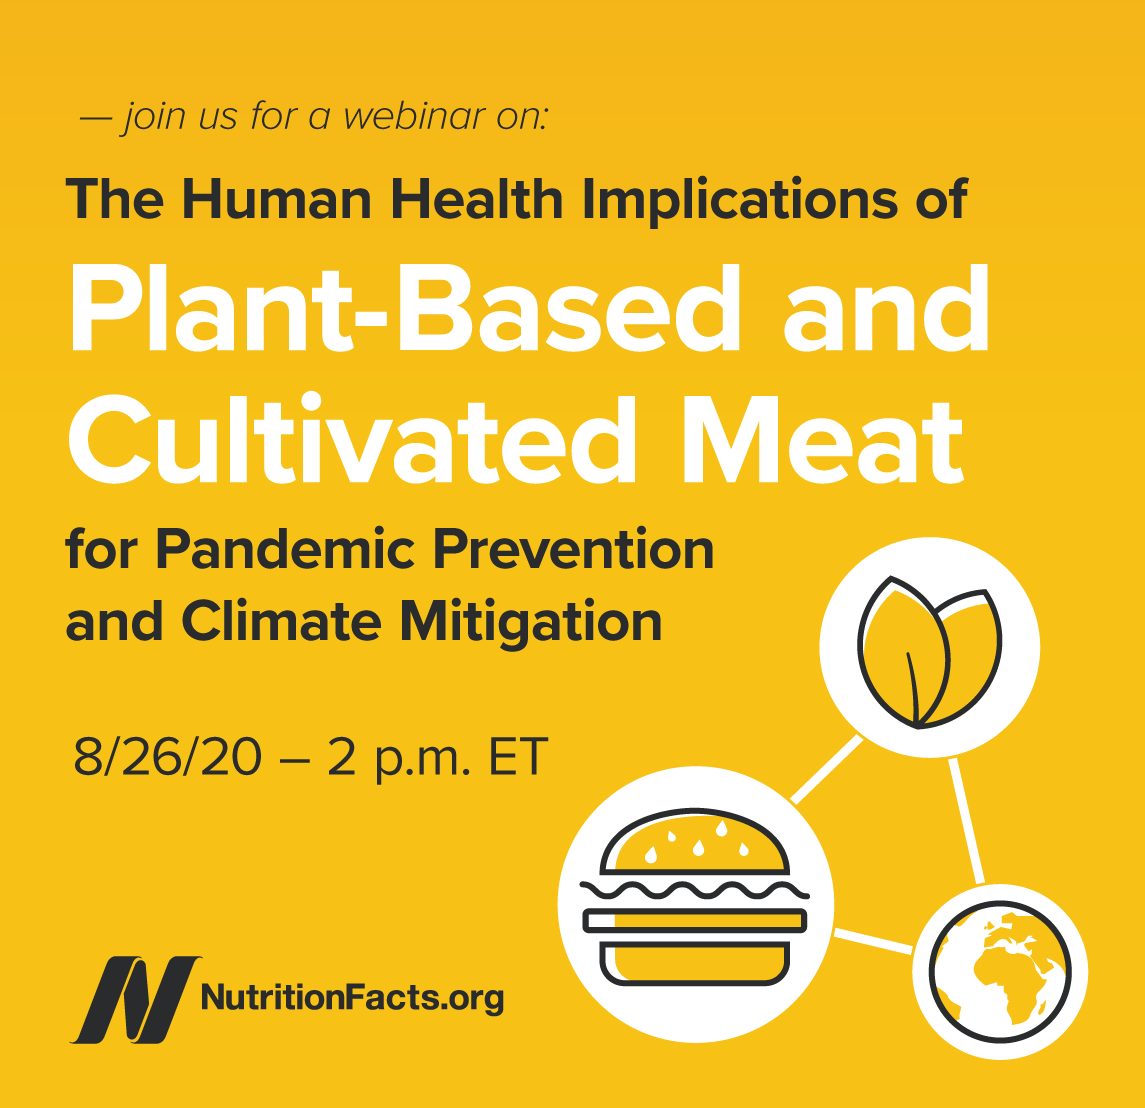 The Human Health Implications of Plant-Based and Cultivated Meat for Pandemic Prevention and Climate Mitigation